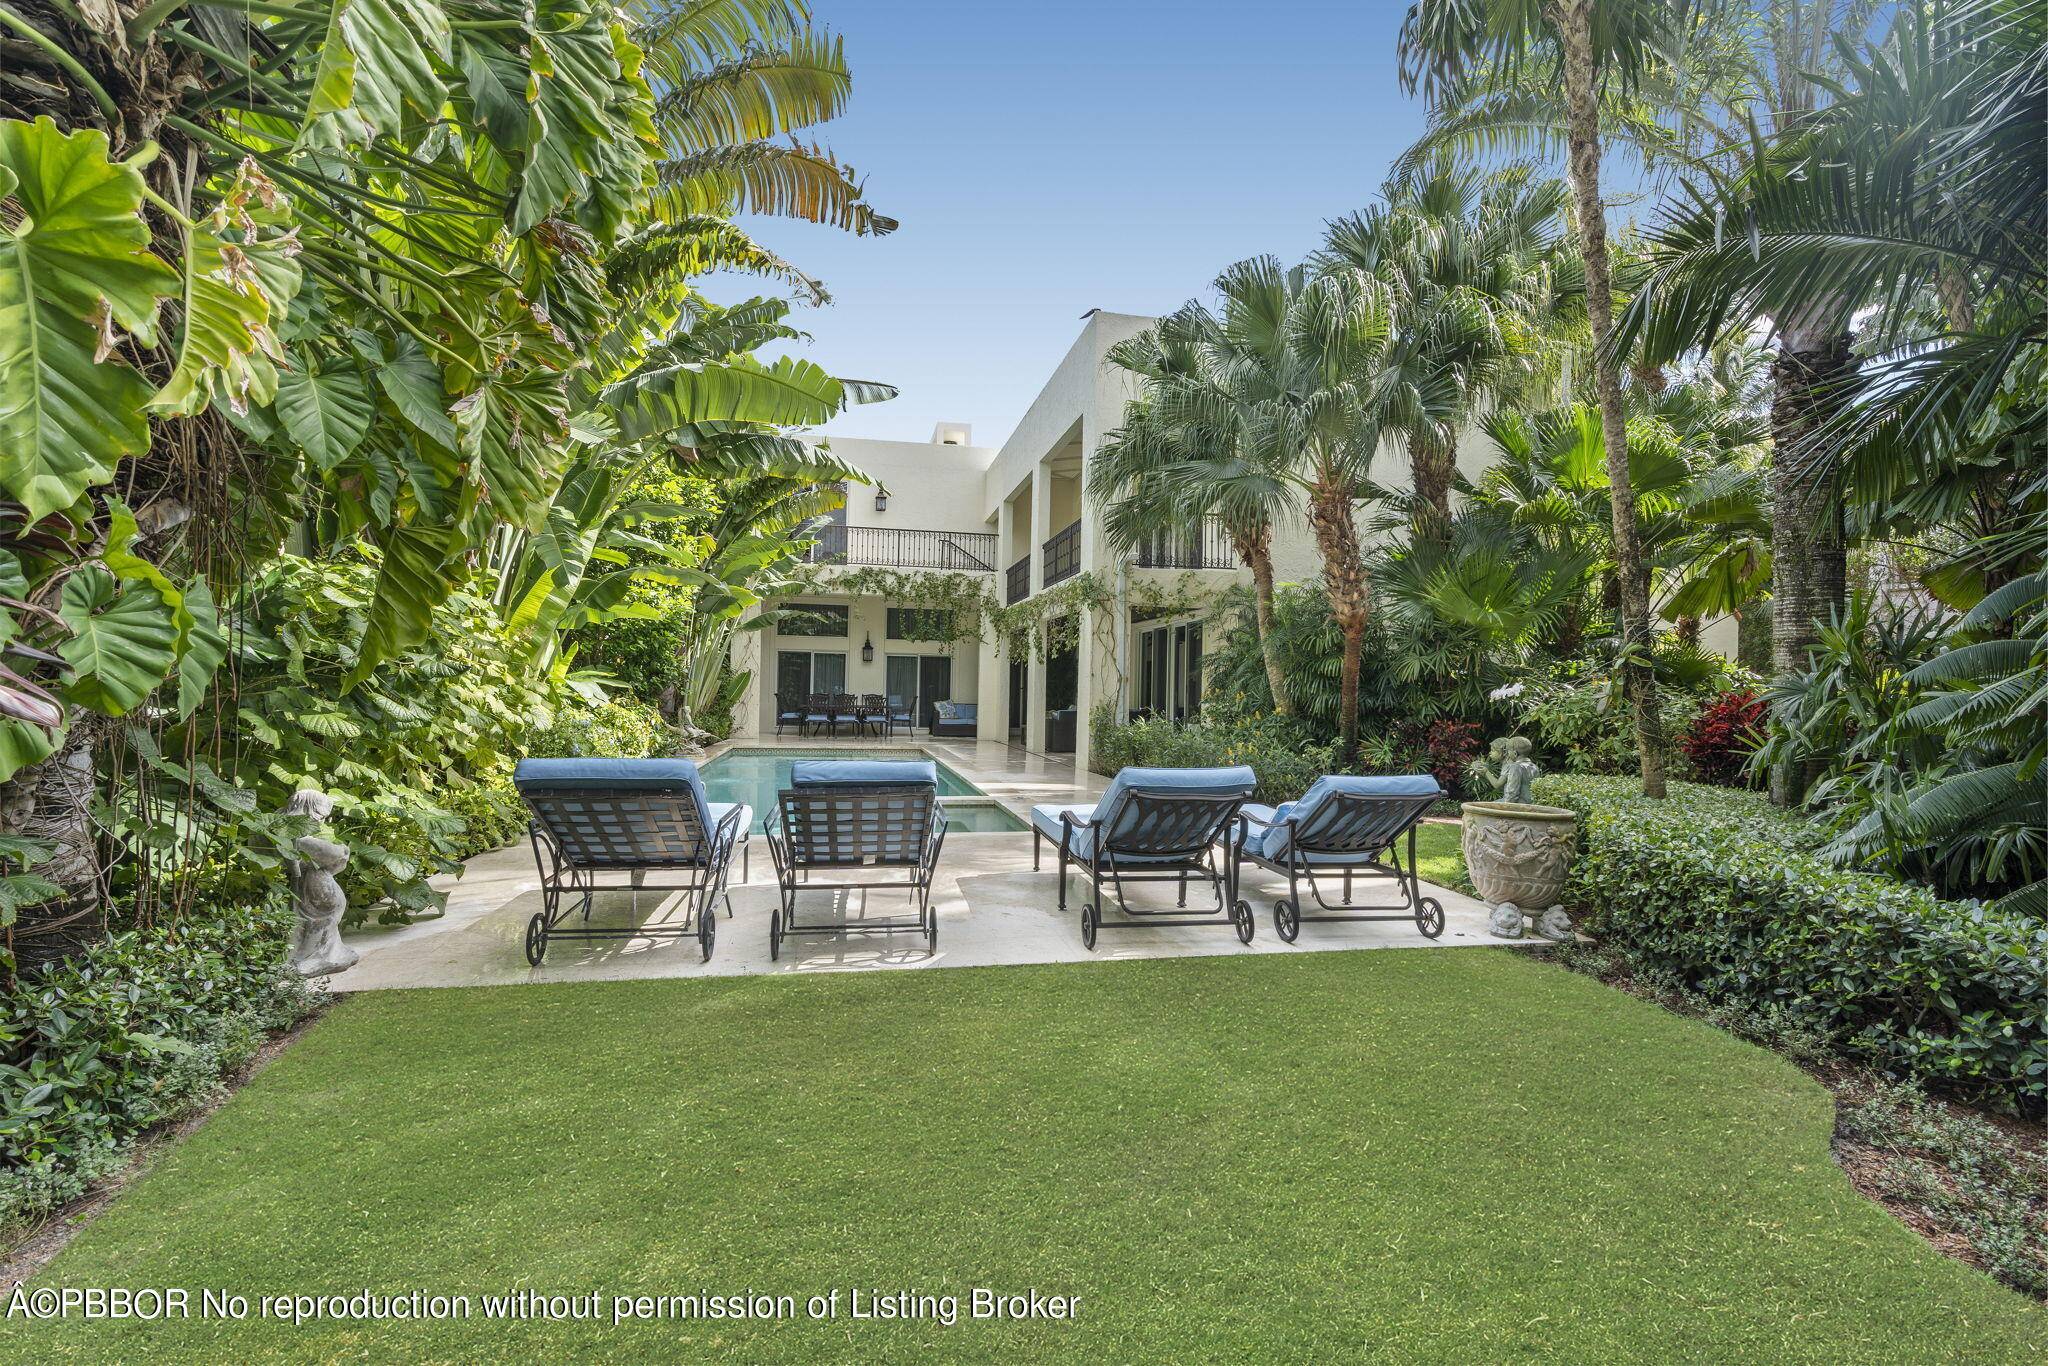 Gorgeous 4BR 5. 1BA Contemporary Mediterranean home situated on a fantastic, oversized lot.